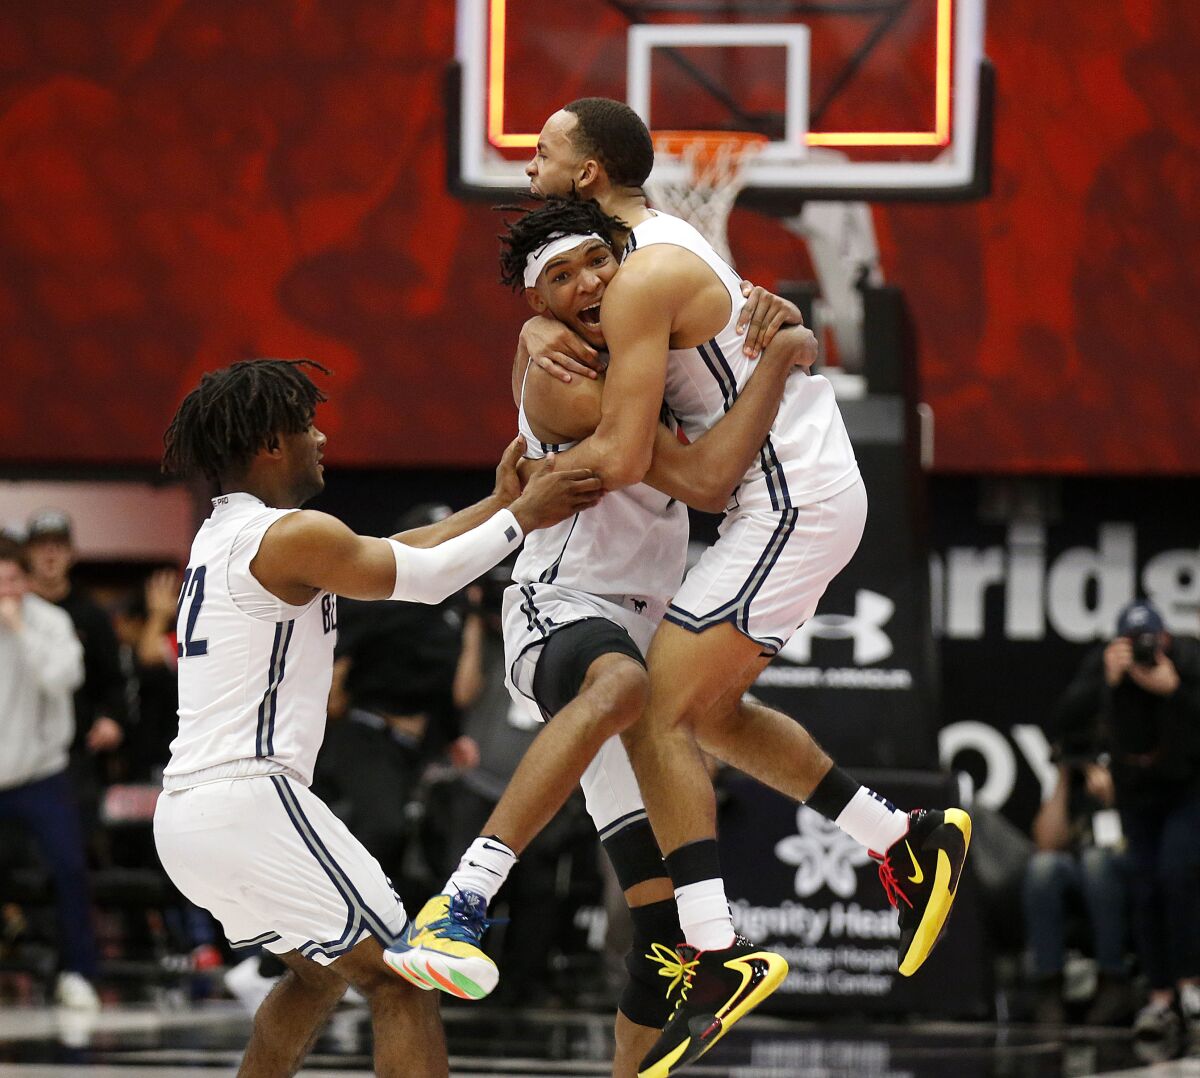 Ziaire Williams, with headband, celebrates with Sierra Canyon teammates Amari Bailey, right, and Tookey Wigington (22) after making the game-winning basket as time expired against Etiwanda in the Southern California Open Division final on March 10 at Cal State Northridge.